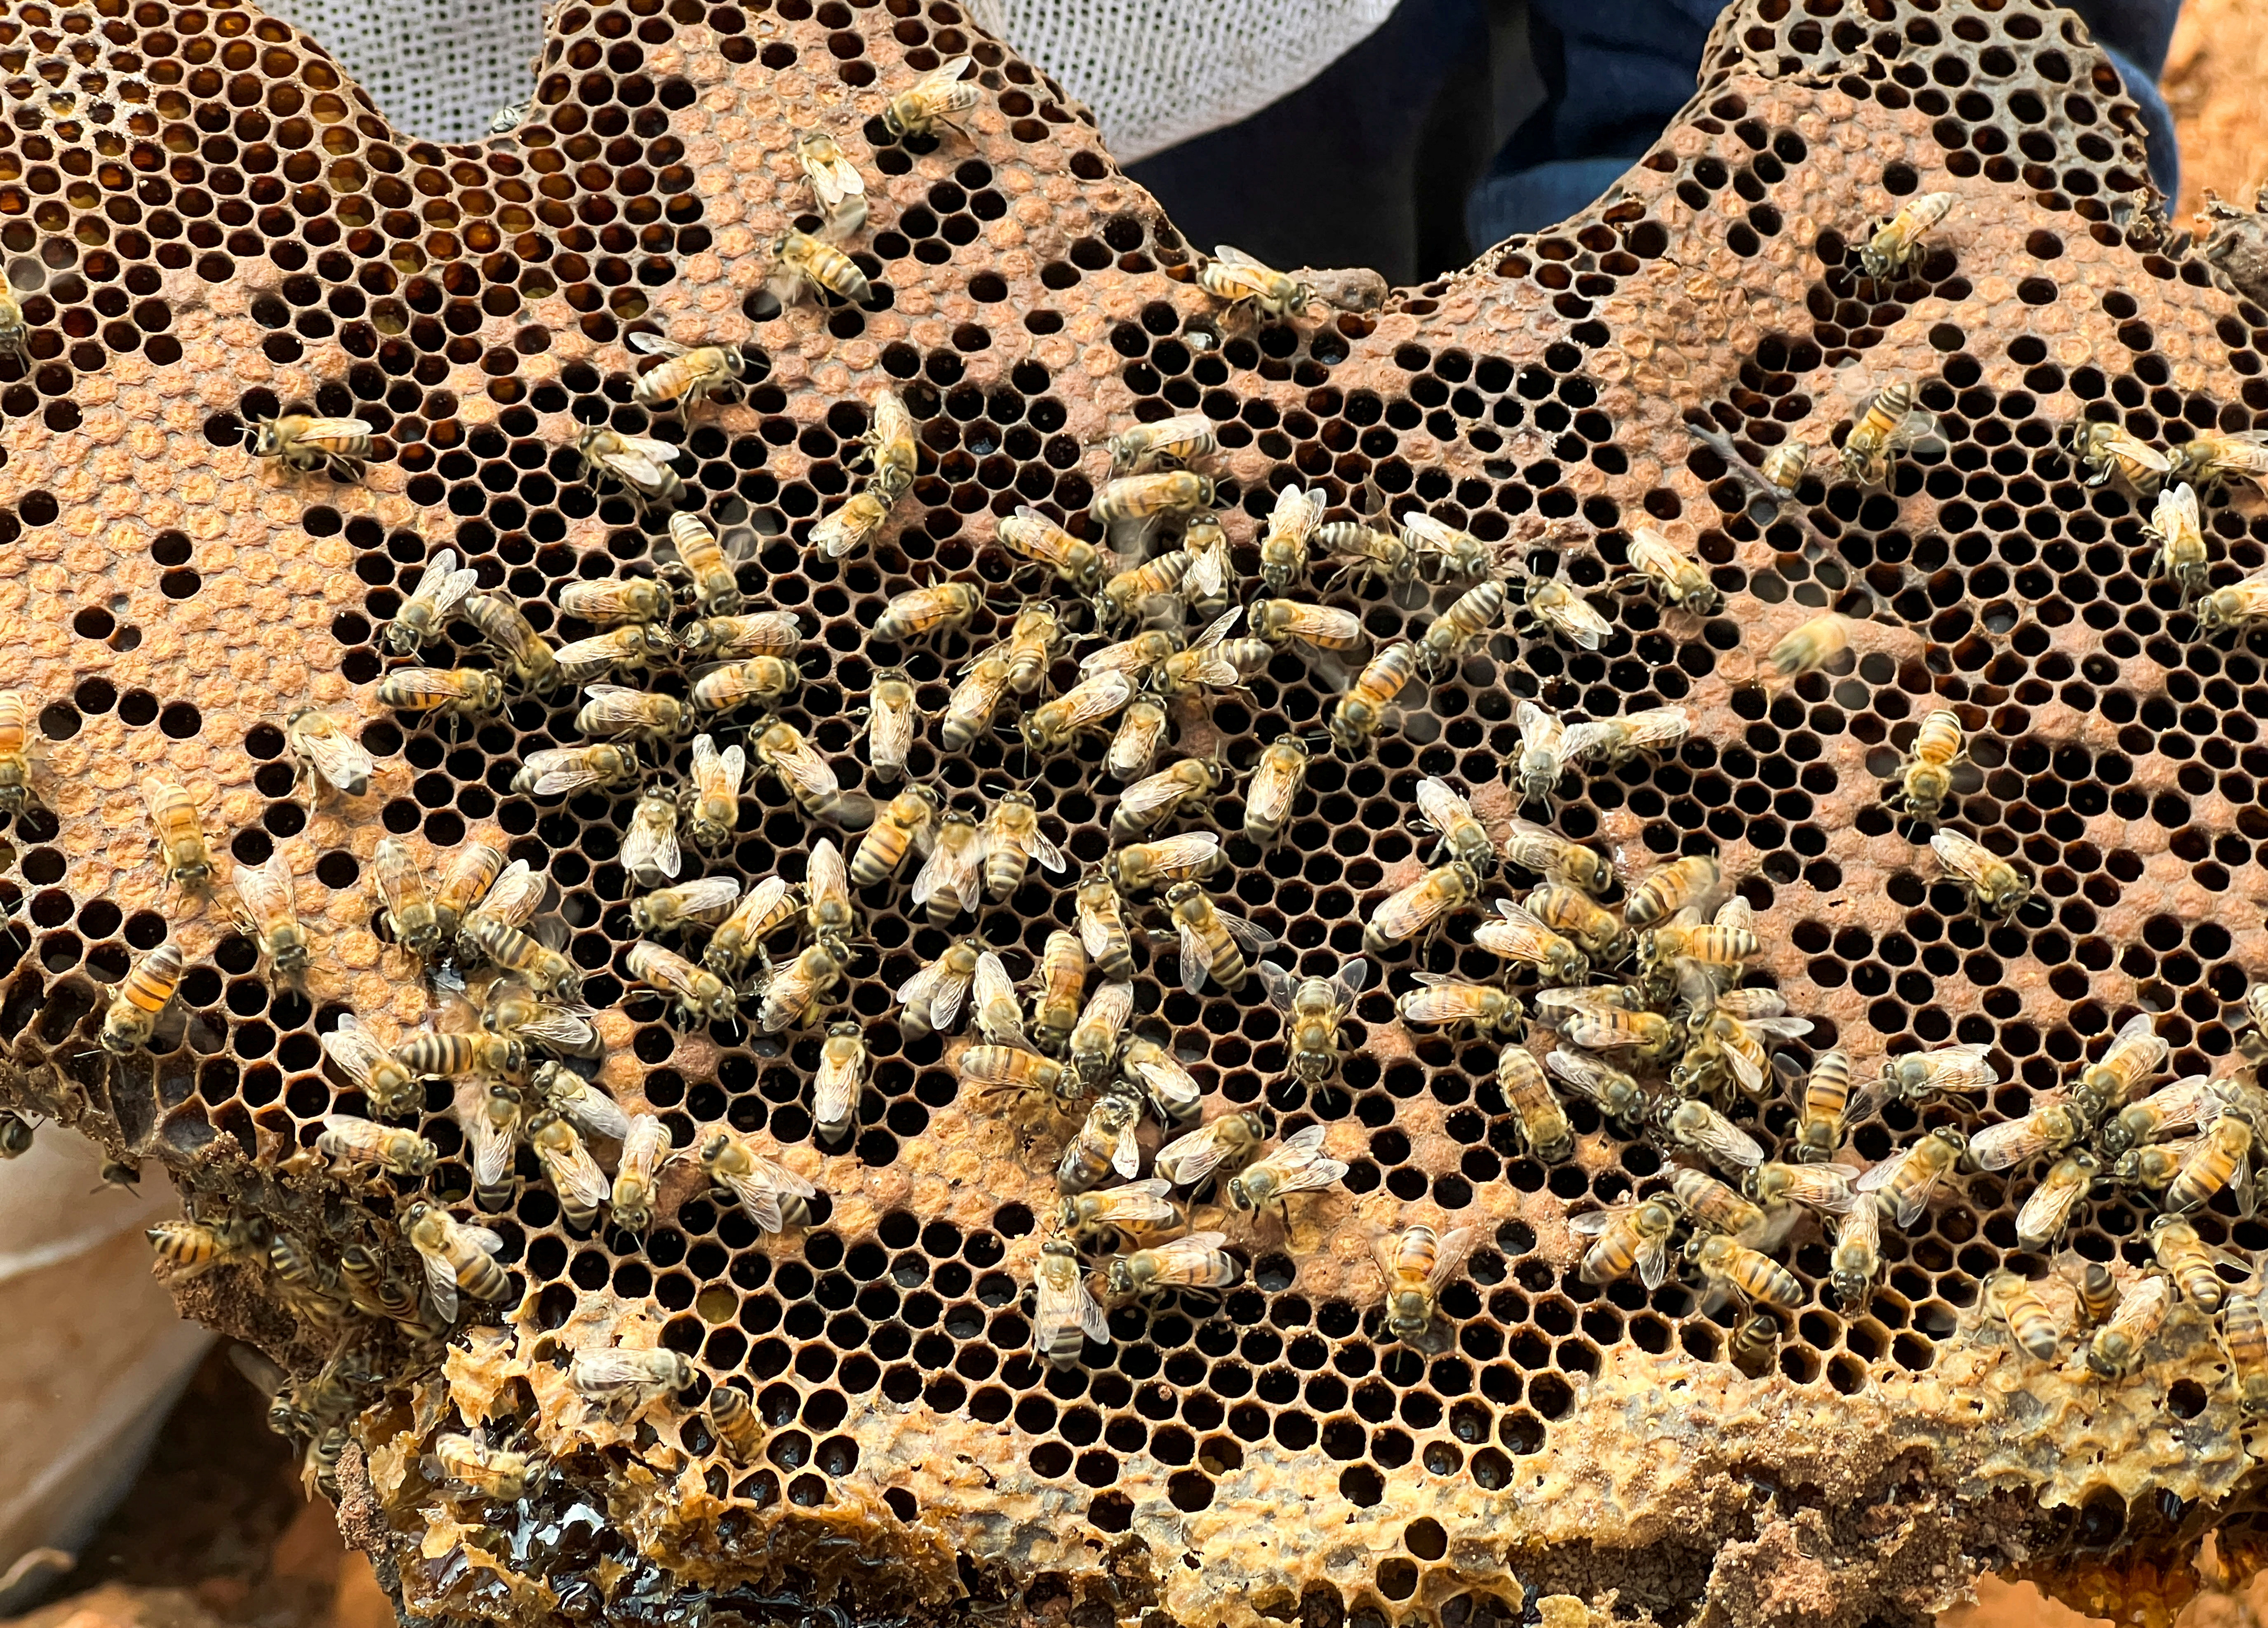 Mexican farmers save bees from drought and people to protect ecosystems, in Santa Ana Zegache